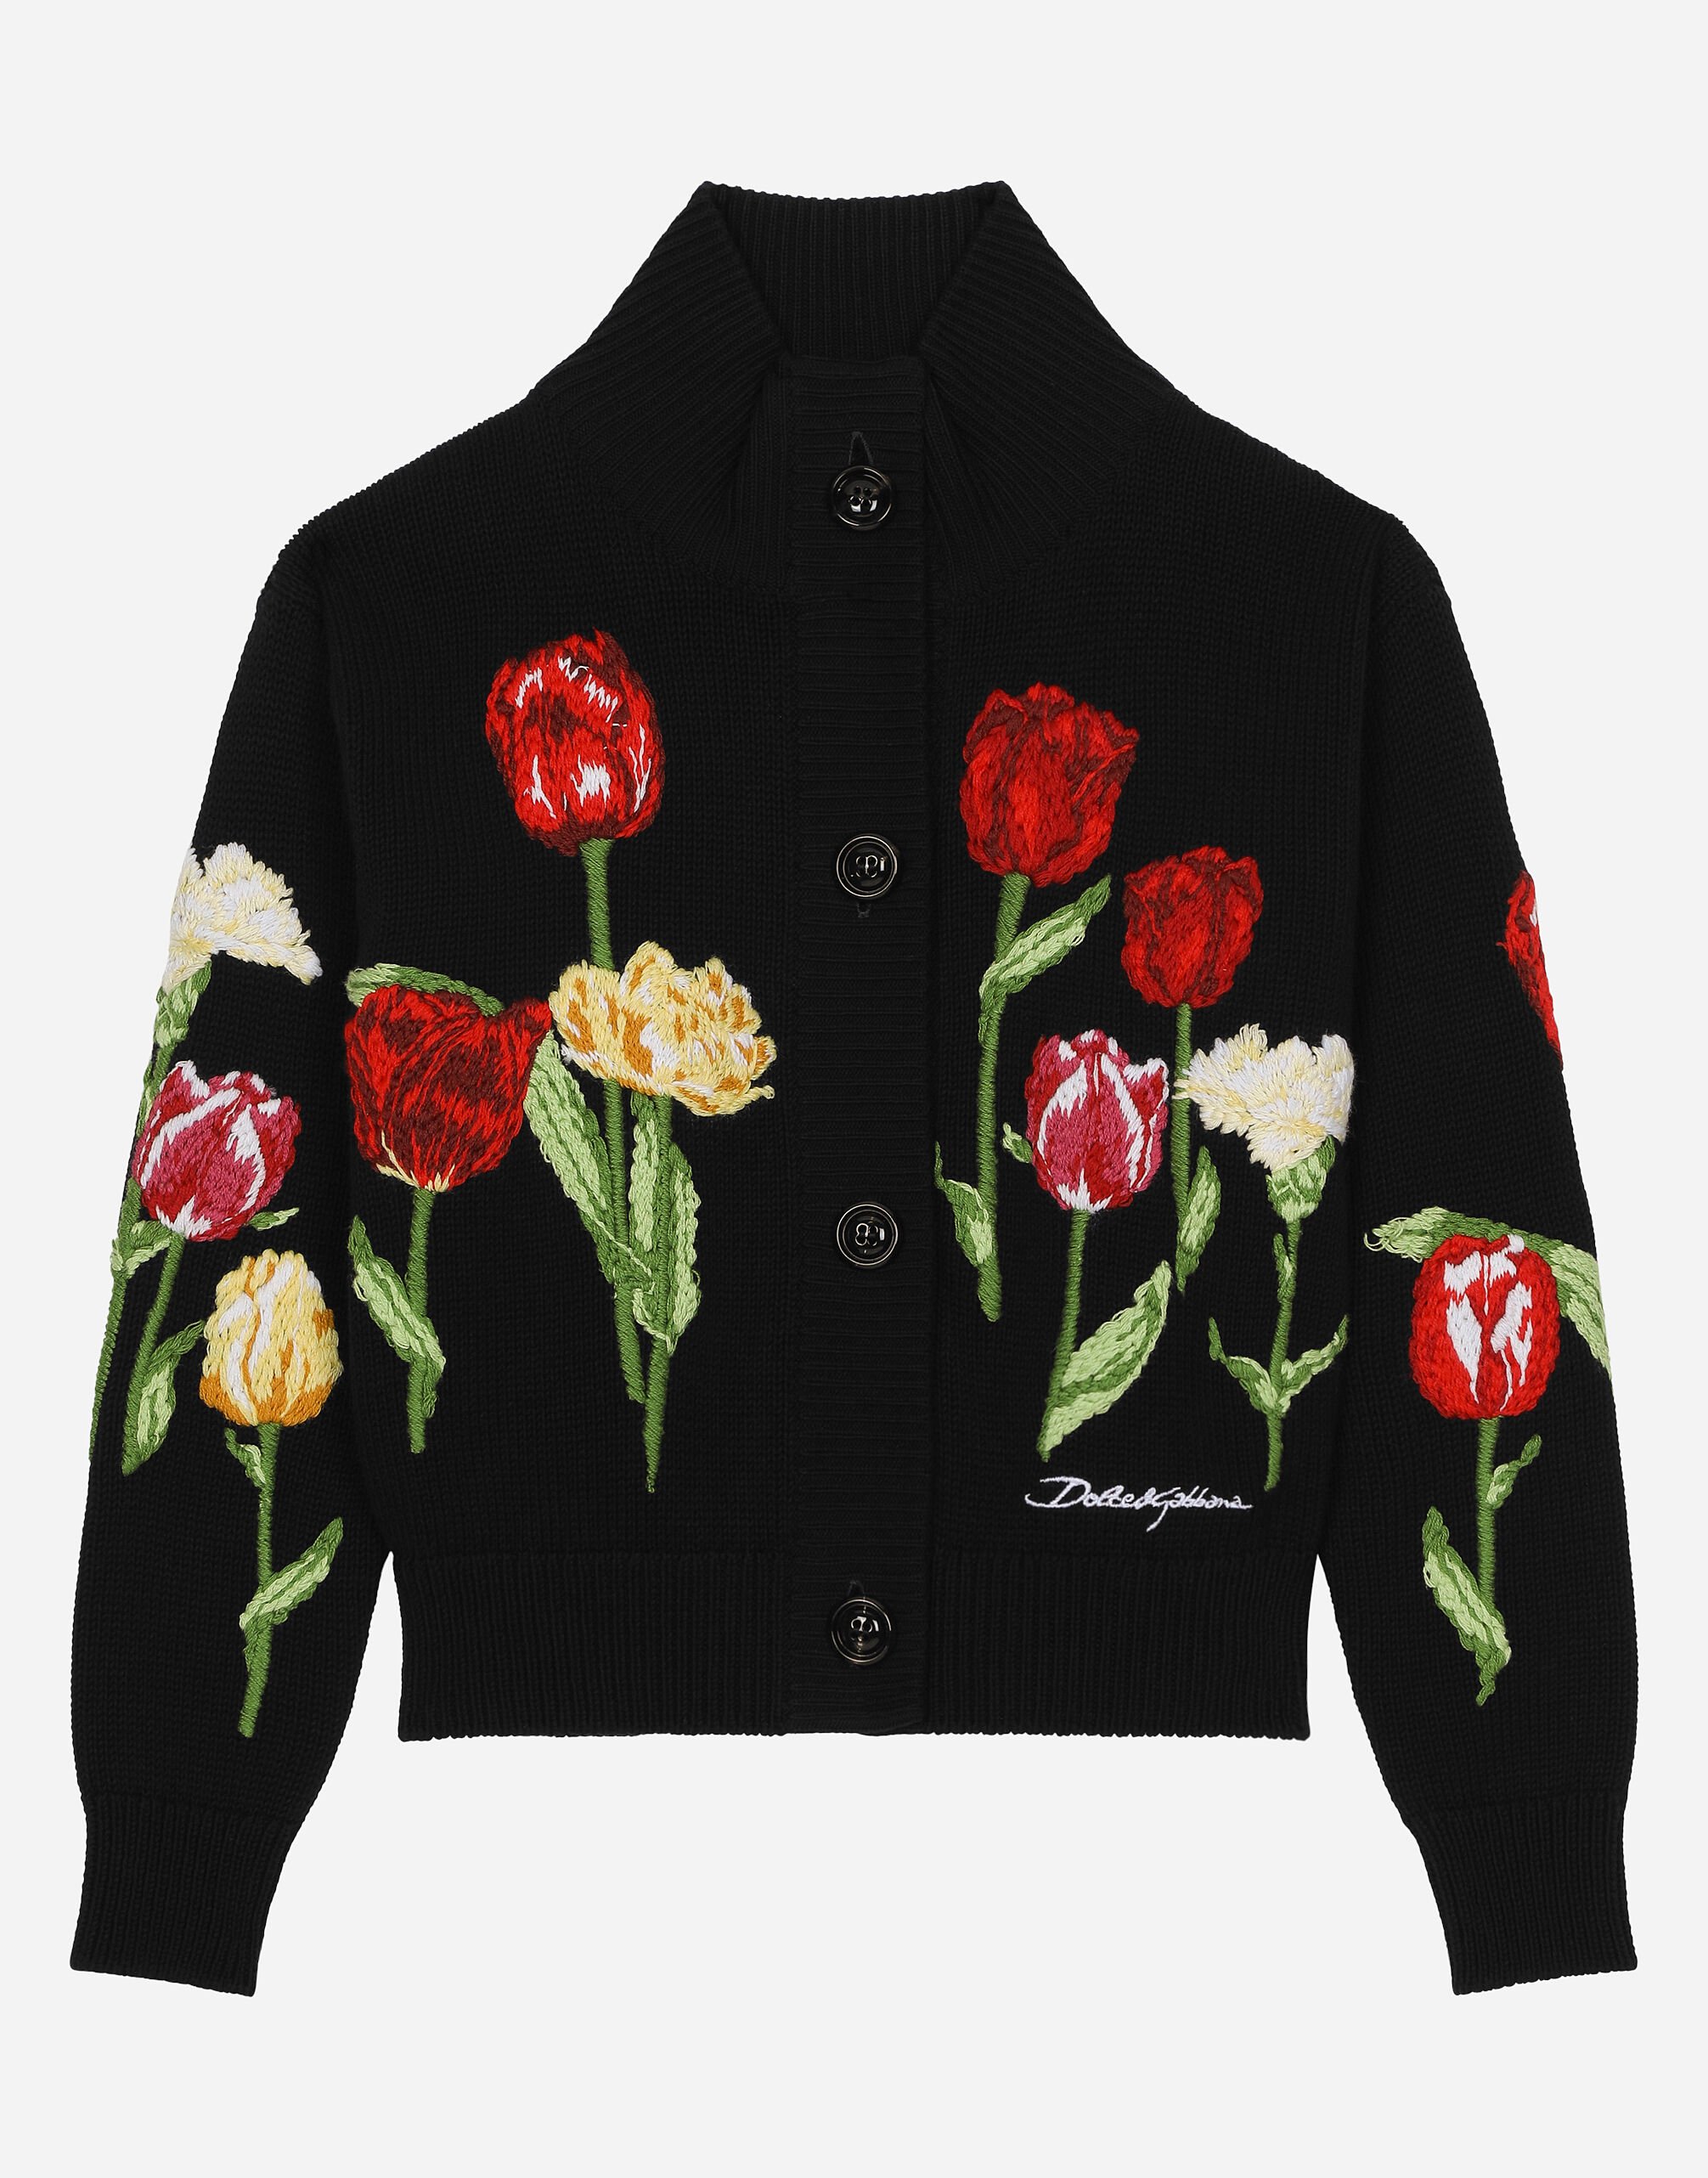 ${brand} Knit cardigan with tulip details and Dolce&Gabbana logo ${colorDescription} ${masterID}